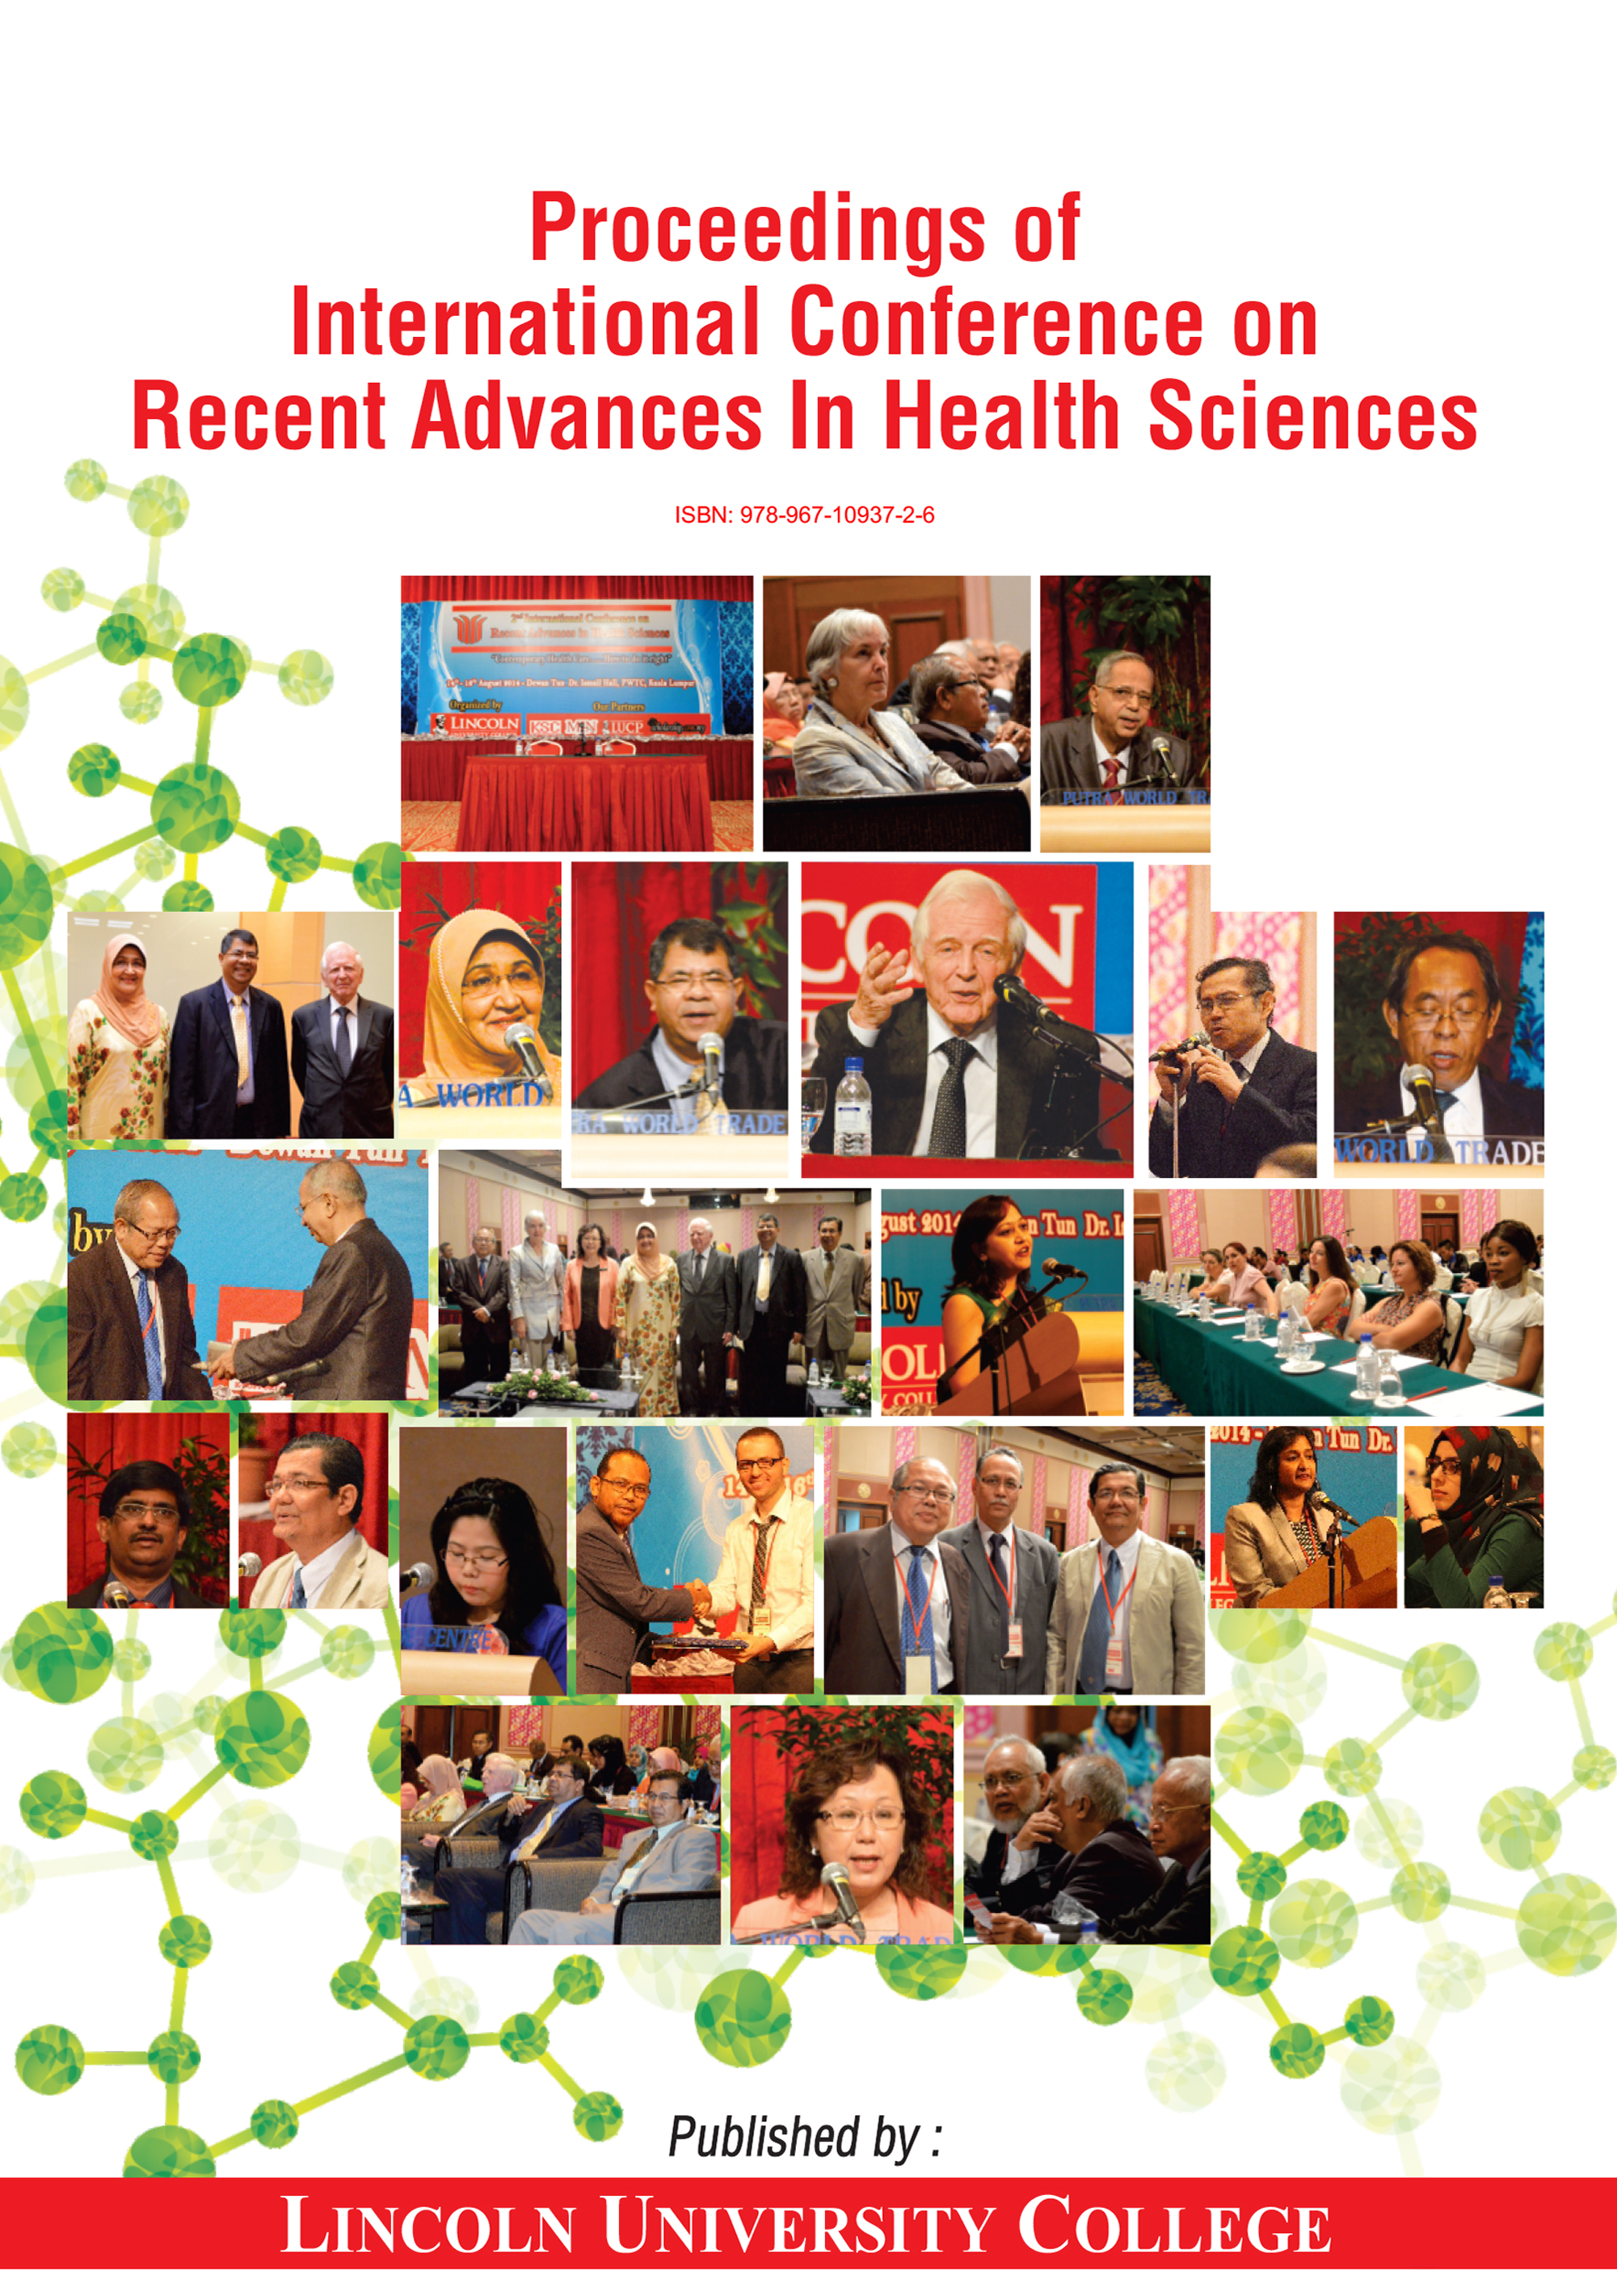 Proceedings-of-International-Conference-on-Recent-Advances-in-Health-Sciences